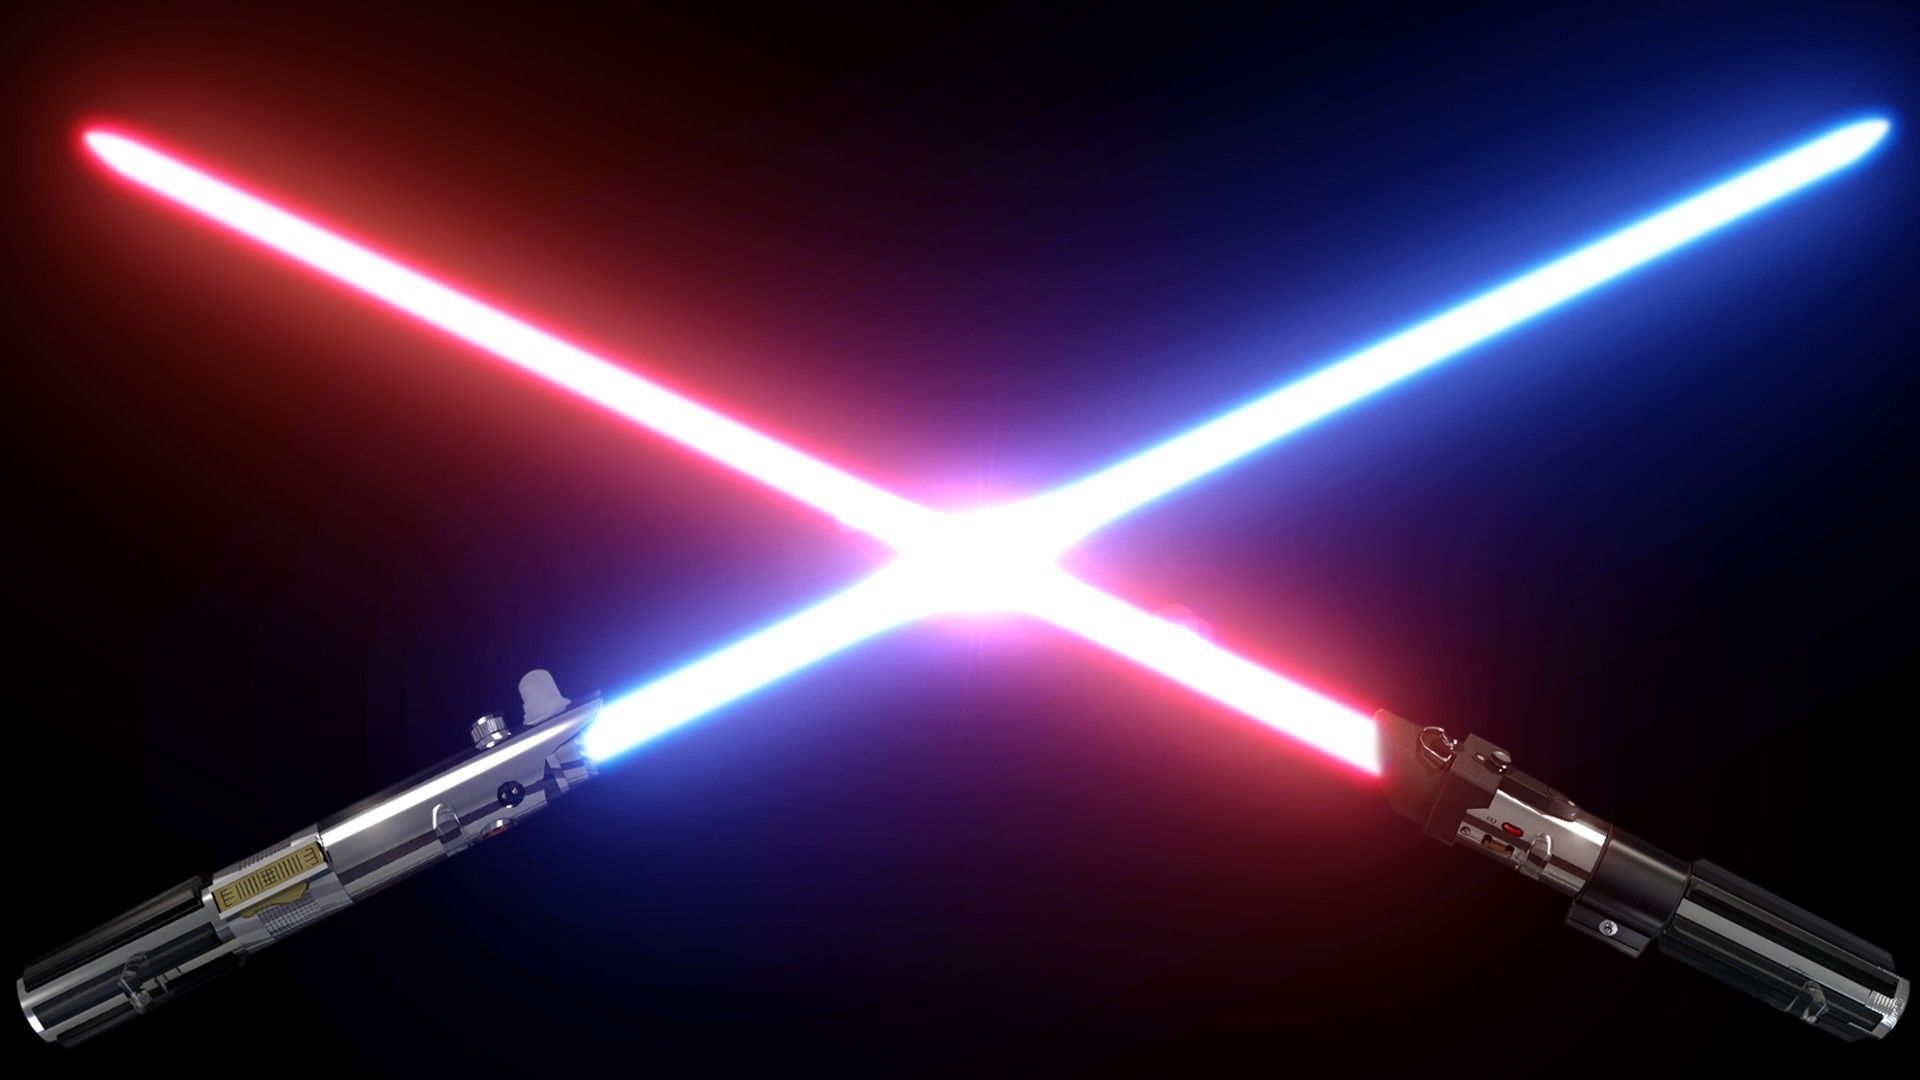 Ps3 Wallpaper HD Background Download Free High Definition And Red Lightsabers